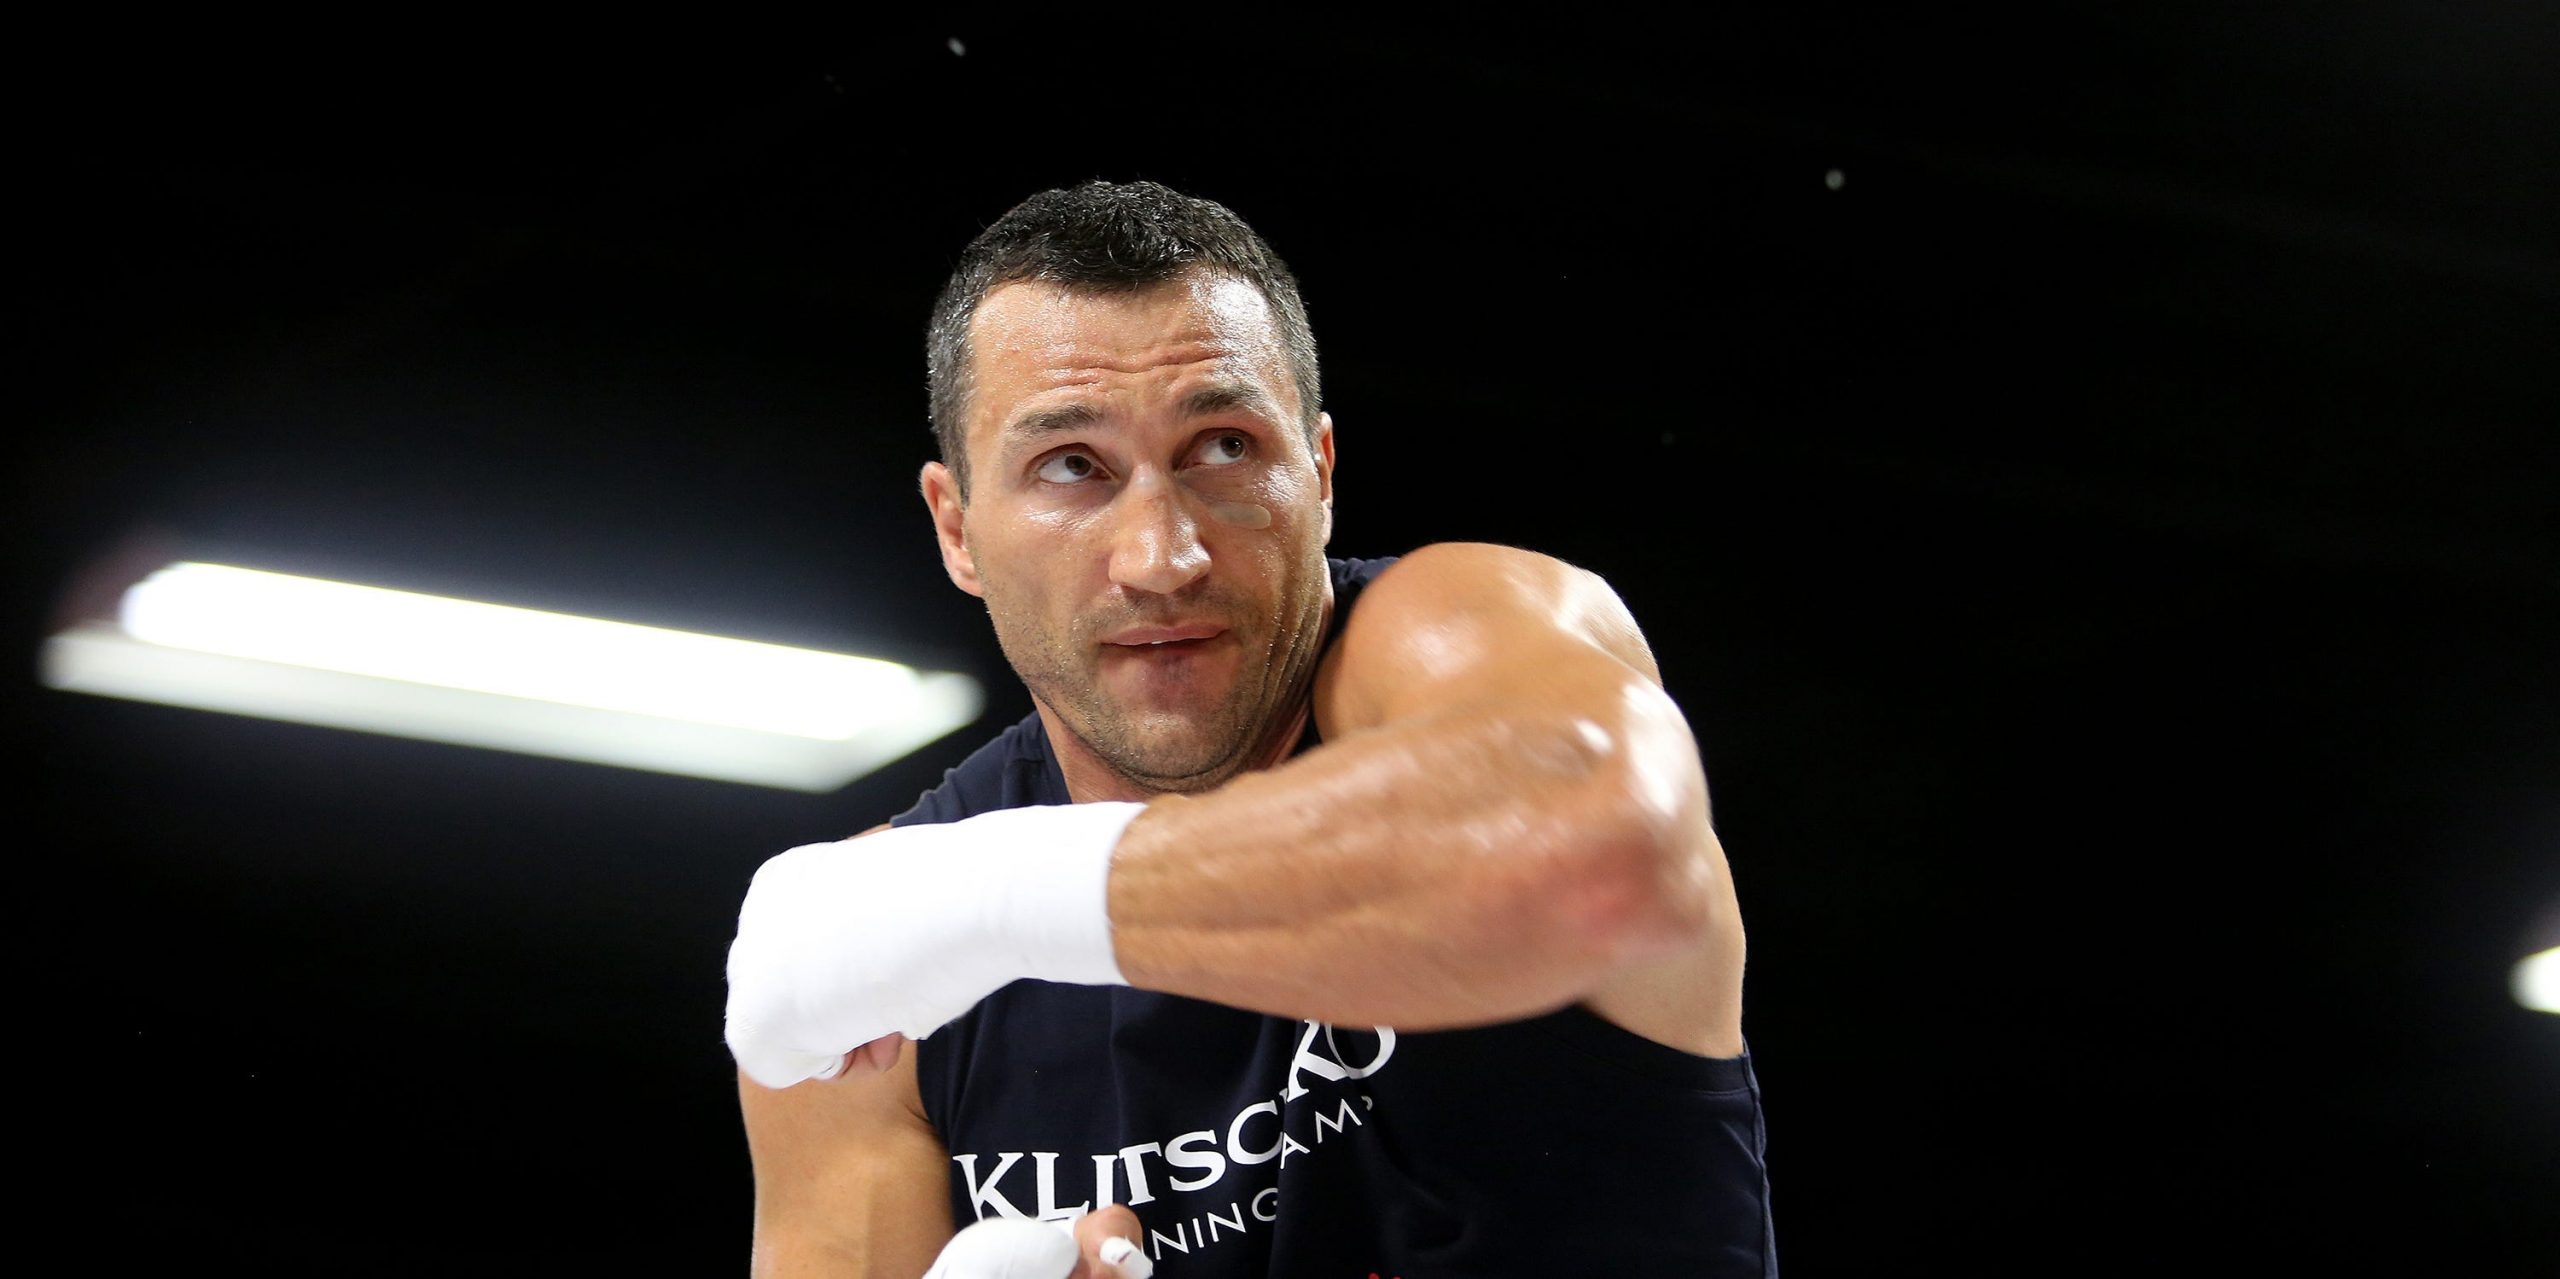 Boxing world champion Wladimir Klitschko works out in a boxing ring on April 7, 2015 in Hollywood, Florida.